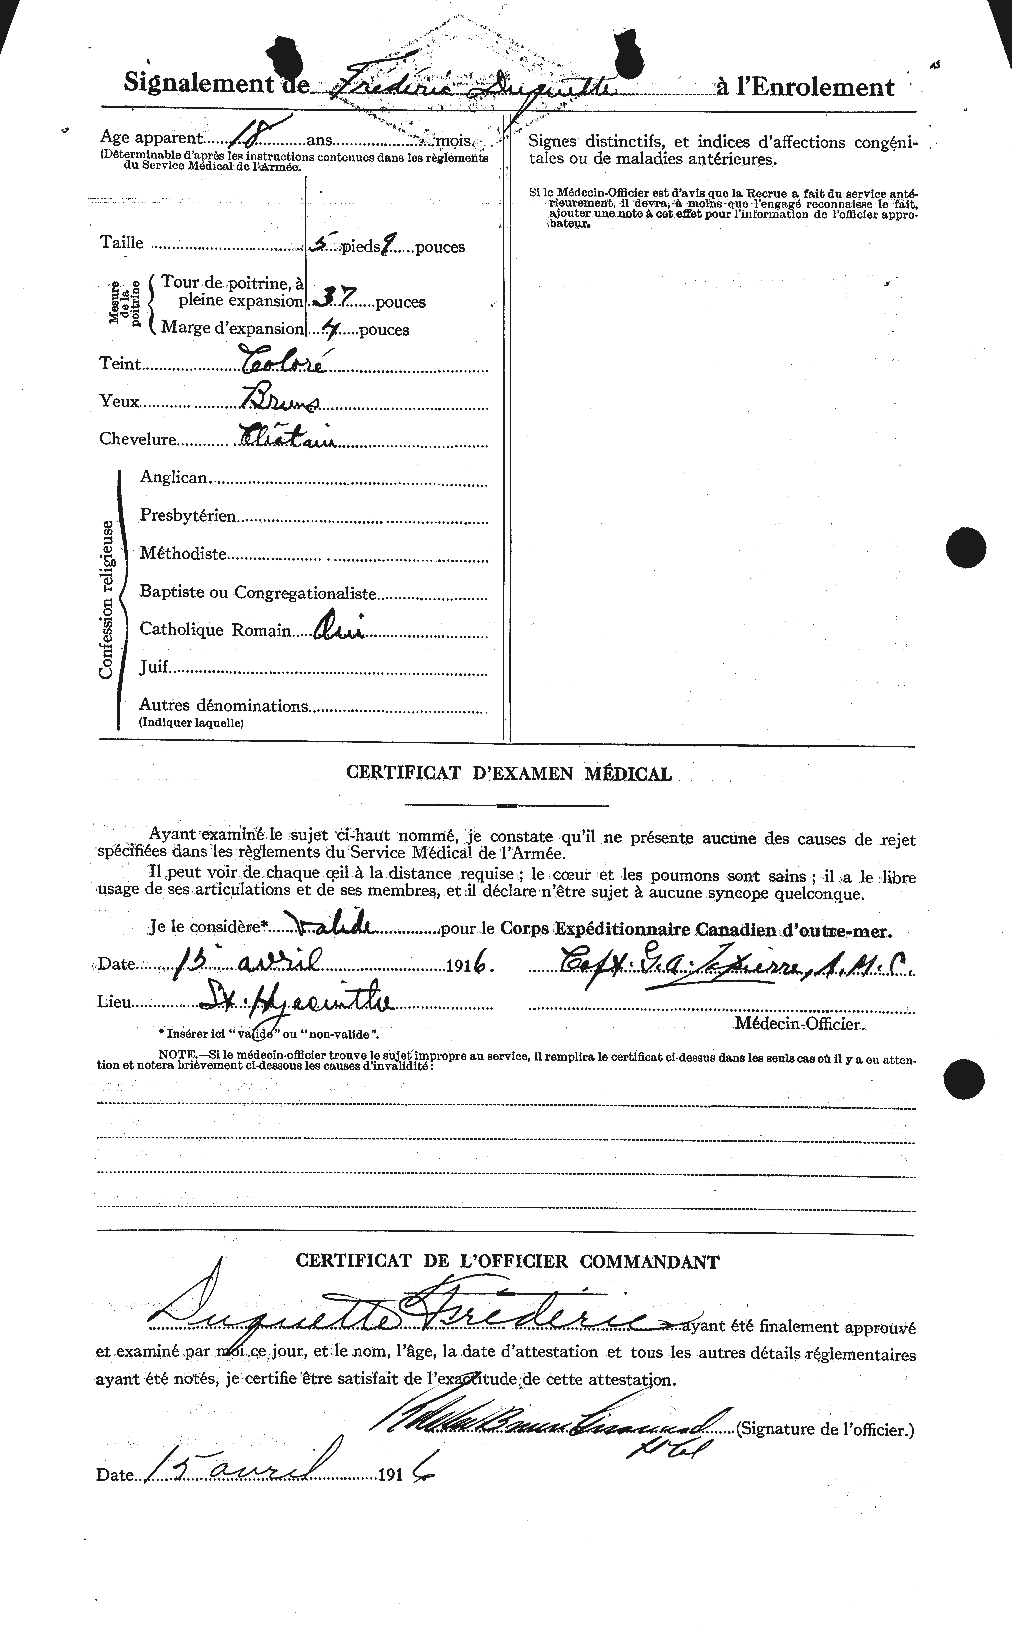 Personnel Records of the First World War - CEF 303387b